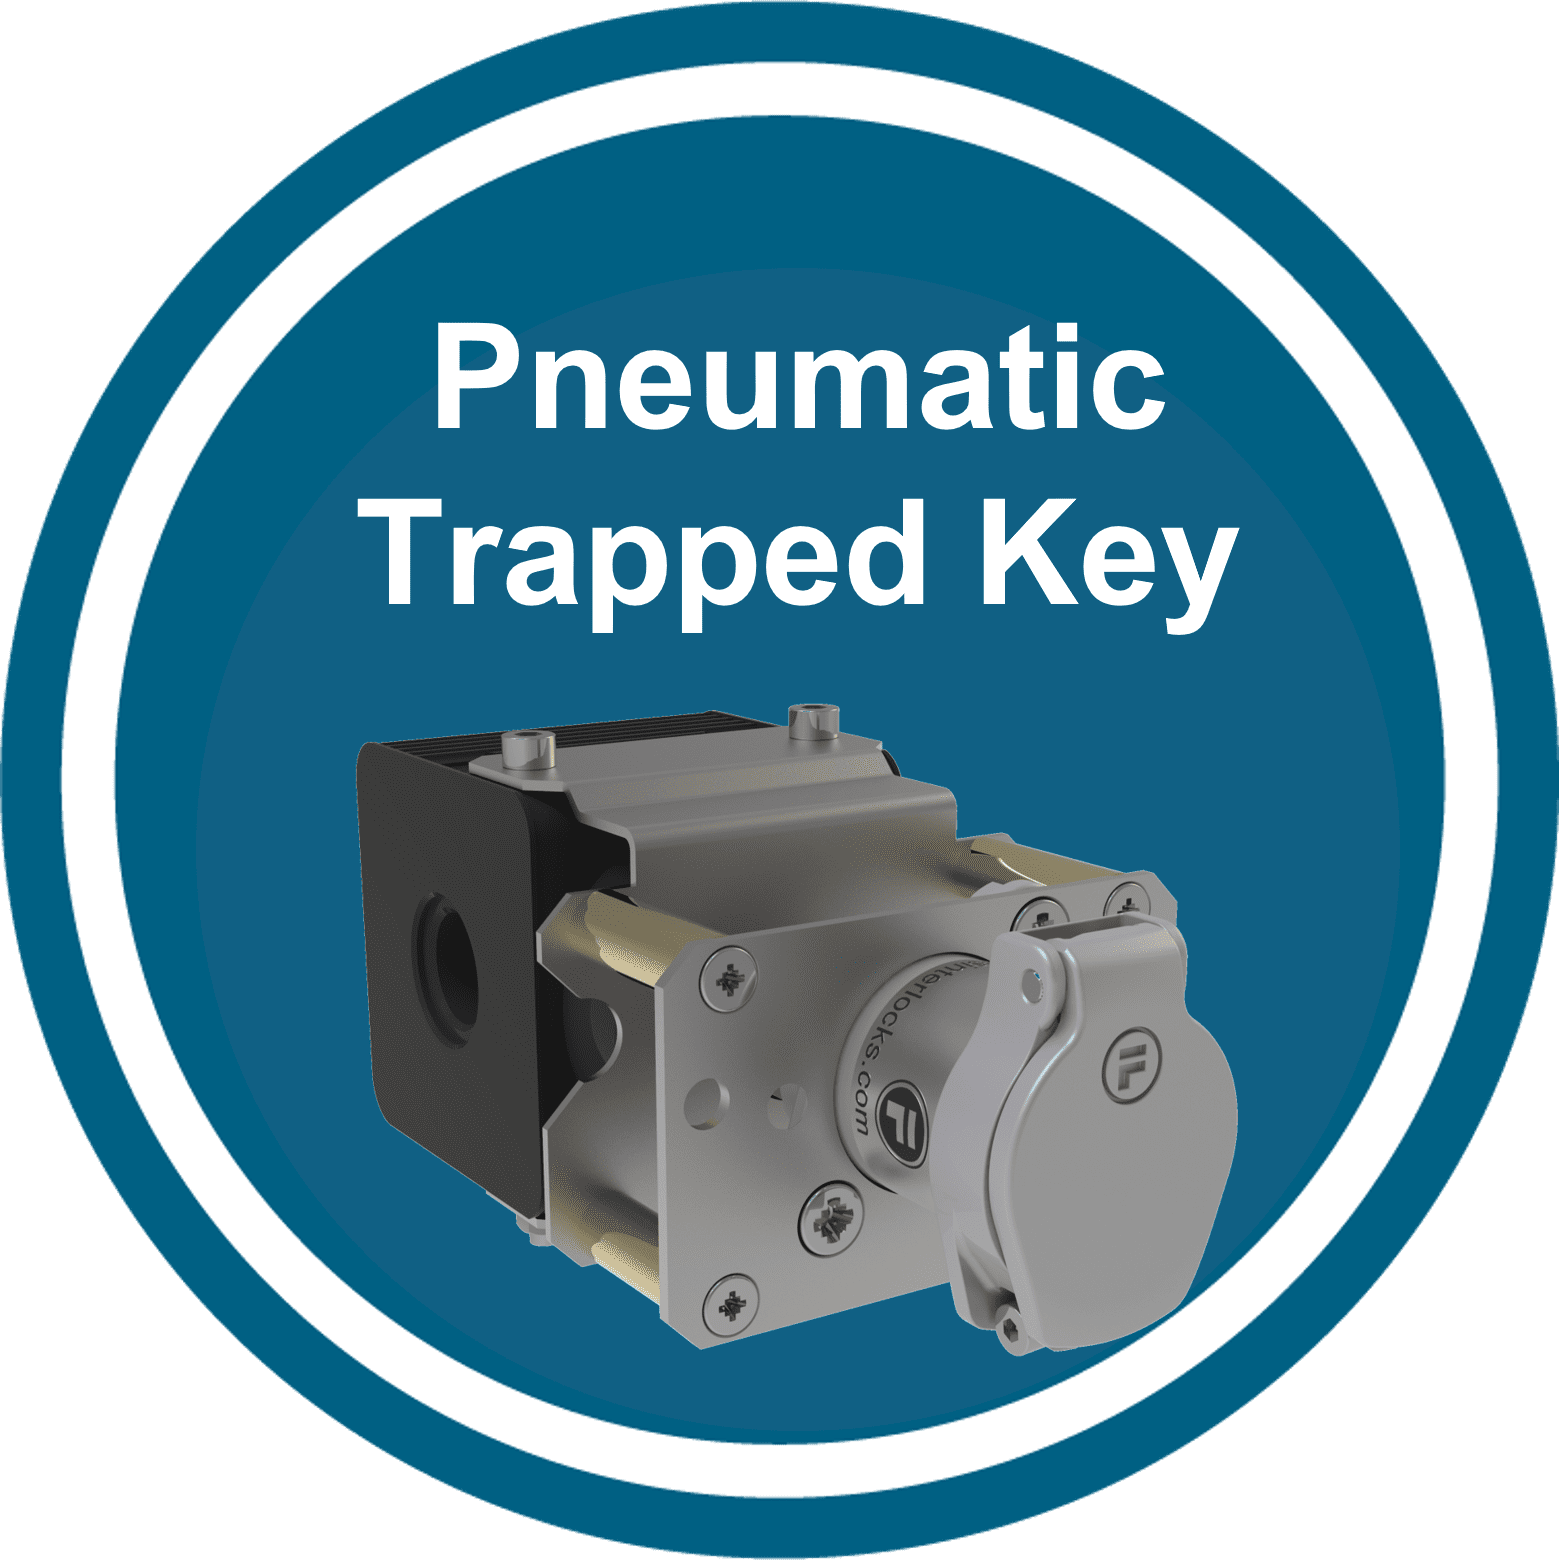 Pneumatic Trapped Key in a blue circle